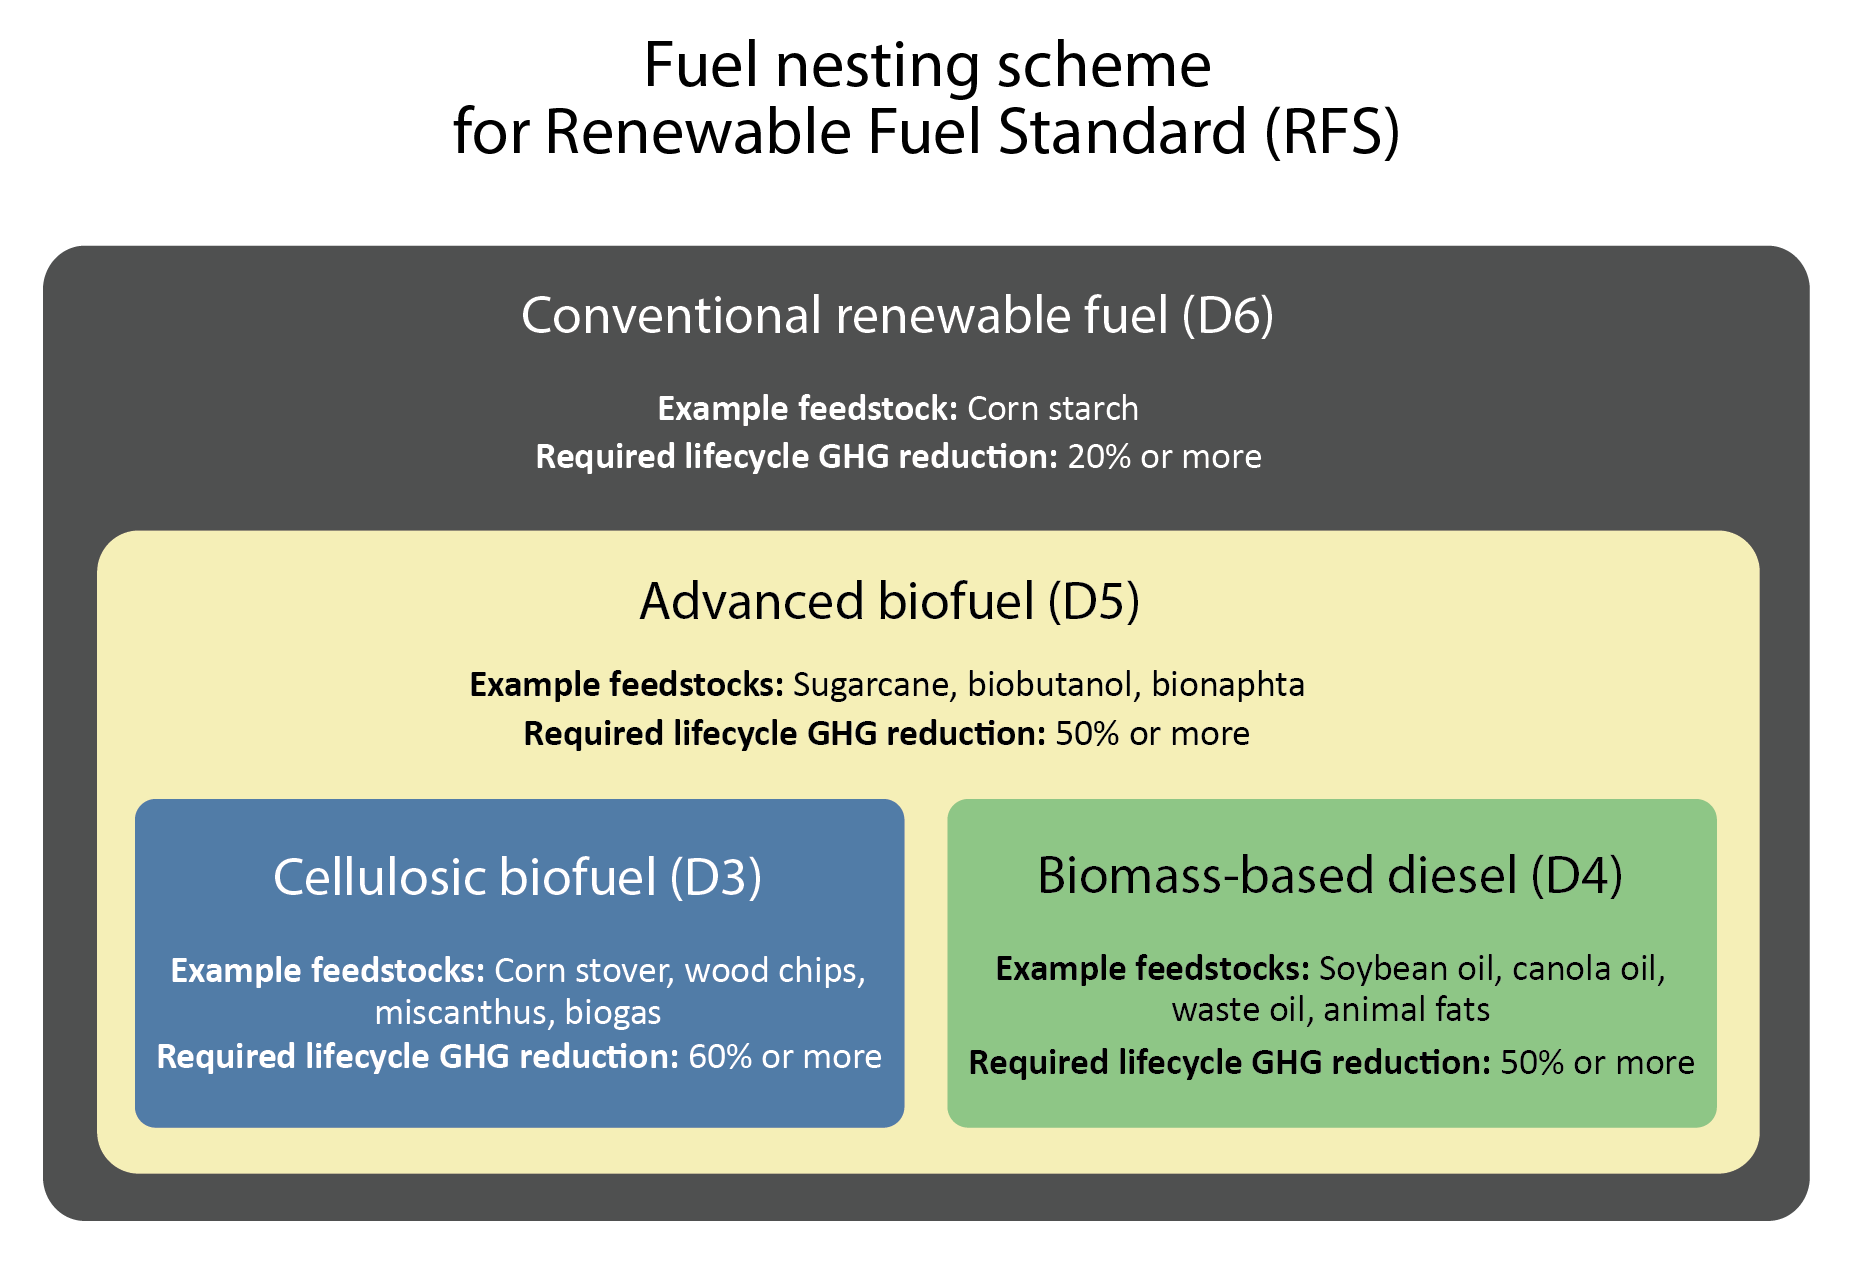 This diagram explains the nesting scheme for the four D-codes within RFS: Conventional renewable fuel (D6), Advanced biofuel (D5), Cellulosic biofuel (D3), and Biomass-based diesel (D4).